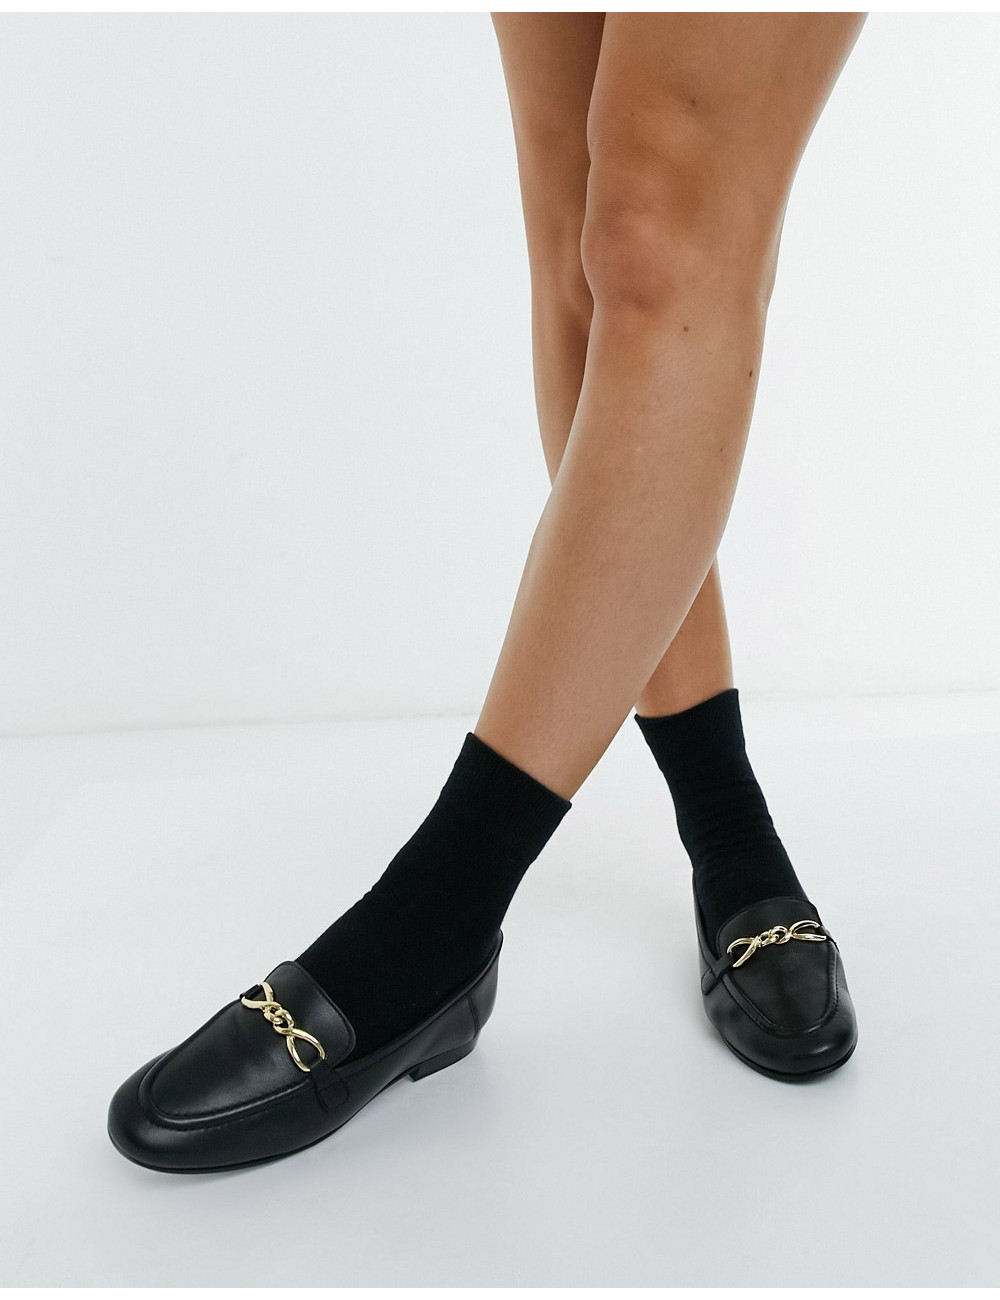 Topshop loafers in black